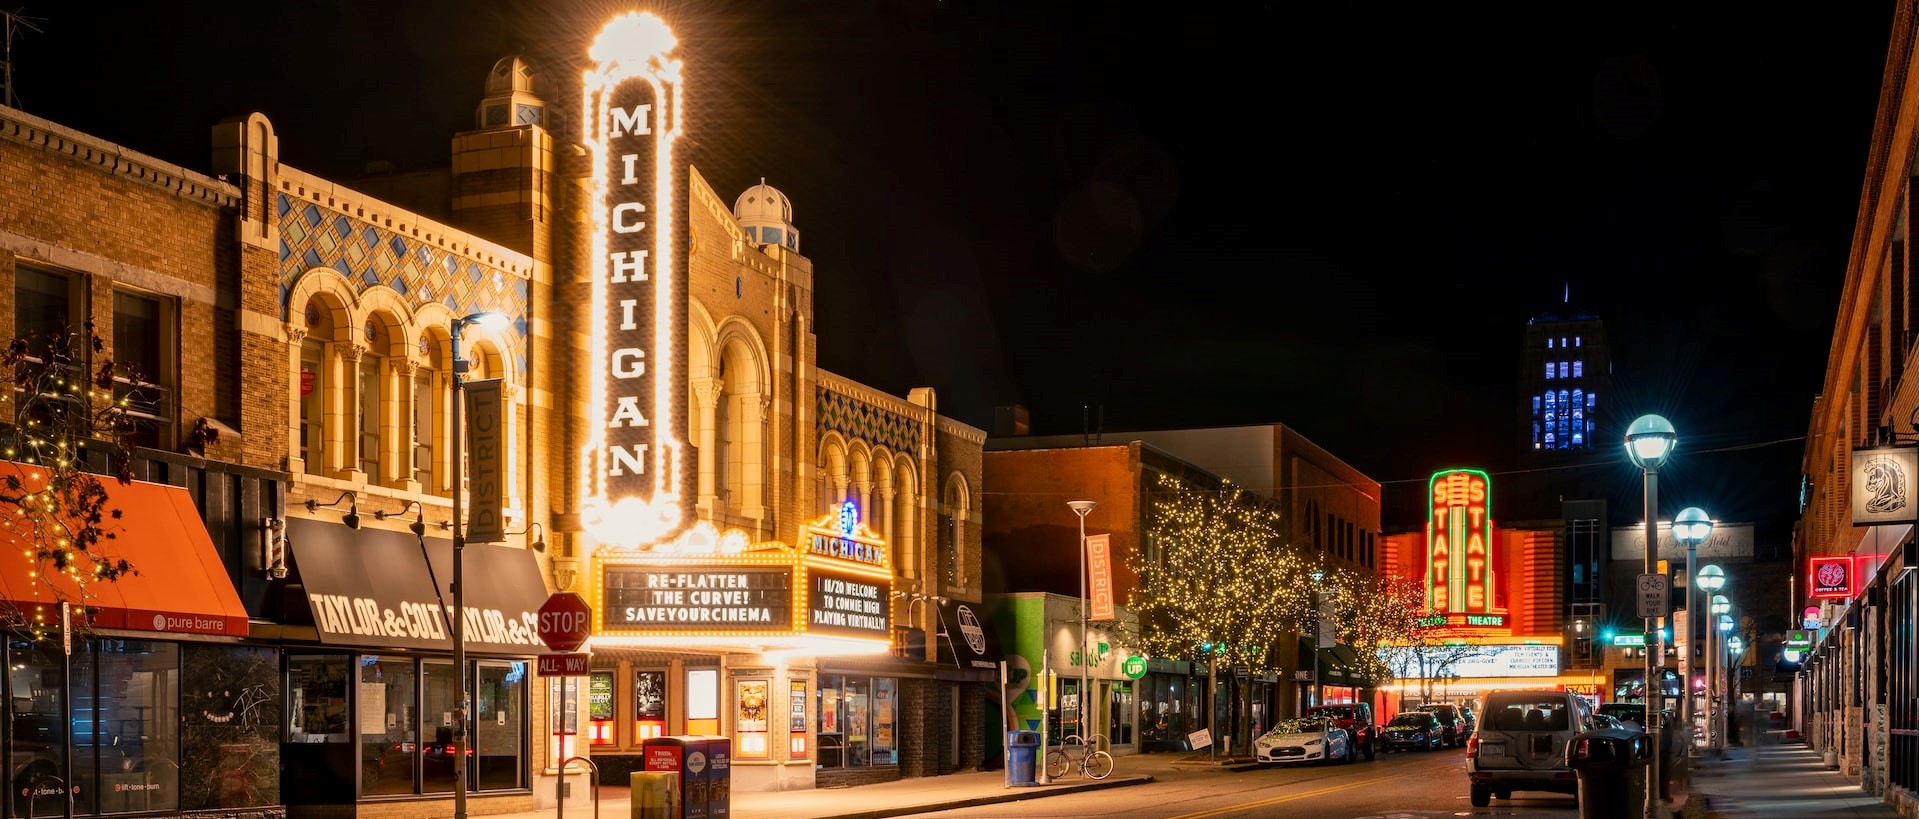 Michigan Theater and State Theater | Kids Car Donations